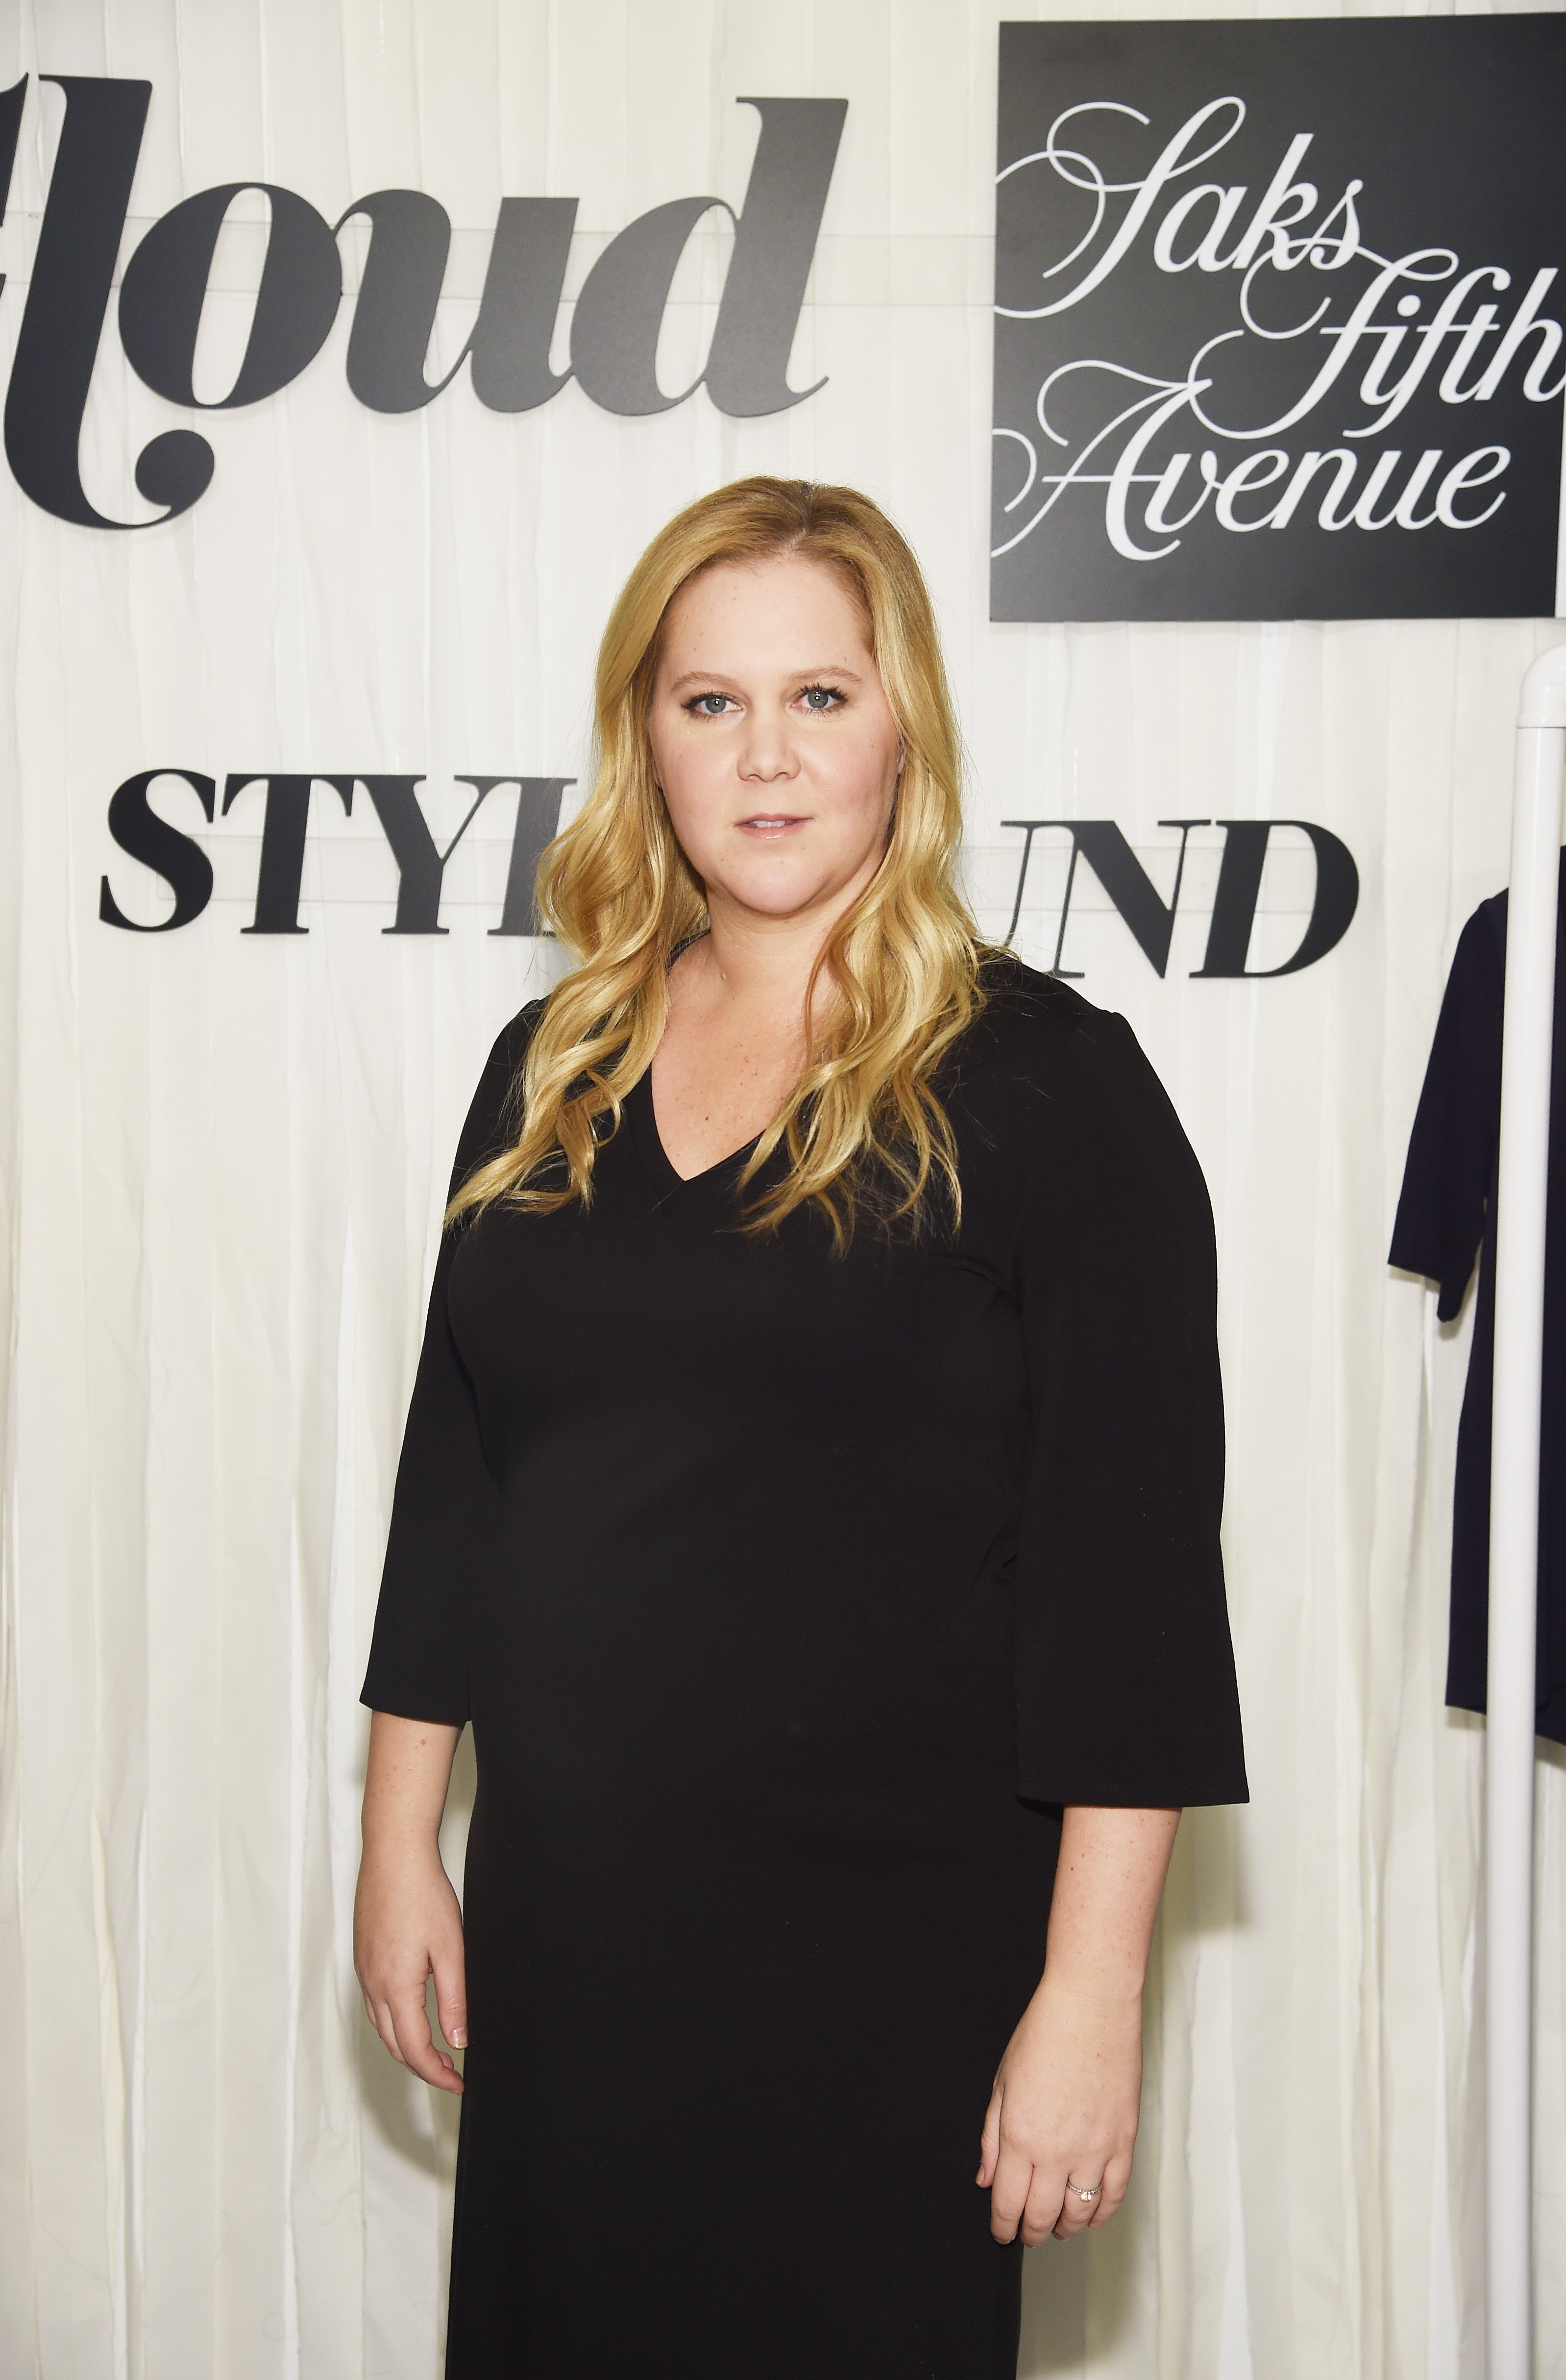 Amy Schumer attends Amy Schumer & Leesa Evans Host Le Cloud Launch Event on December 12, 2018, in New York City. | Source: Getty Images